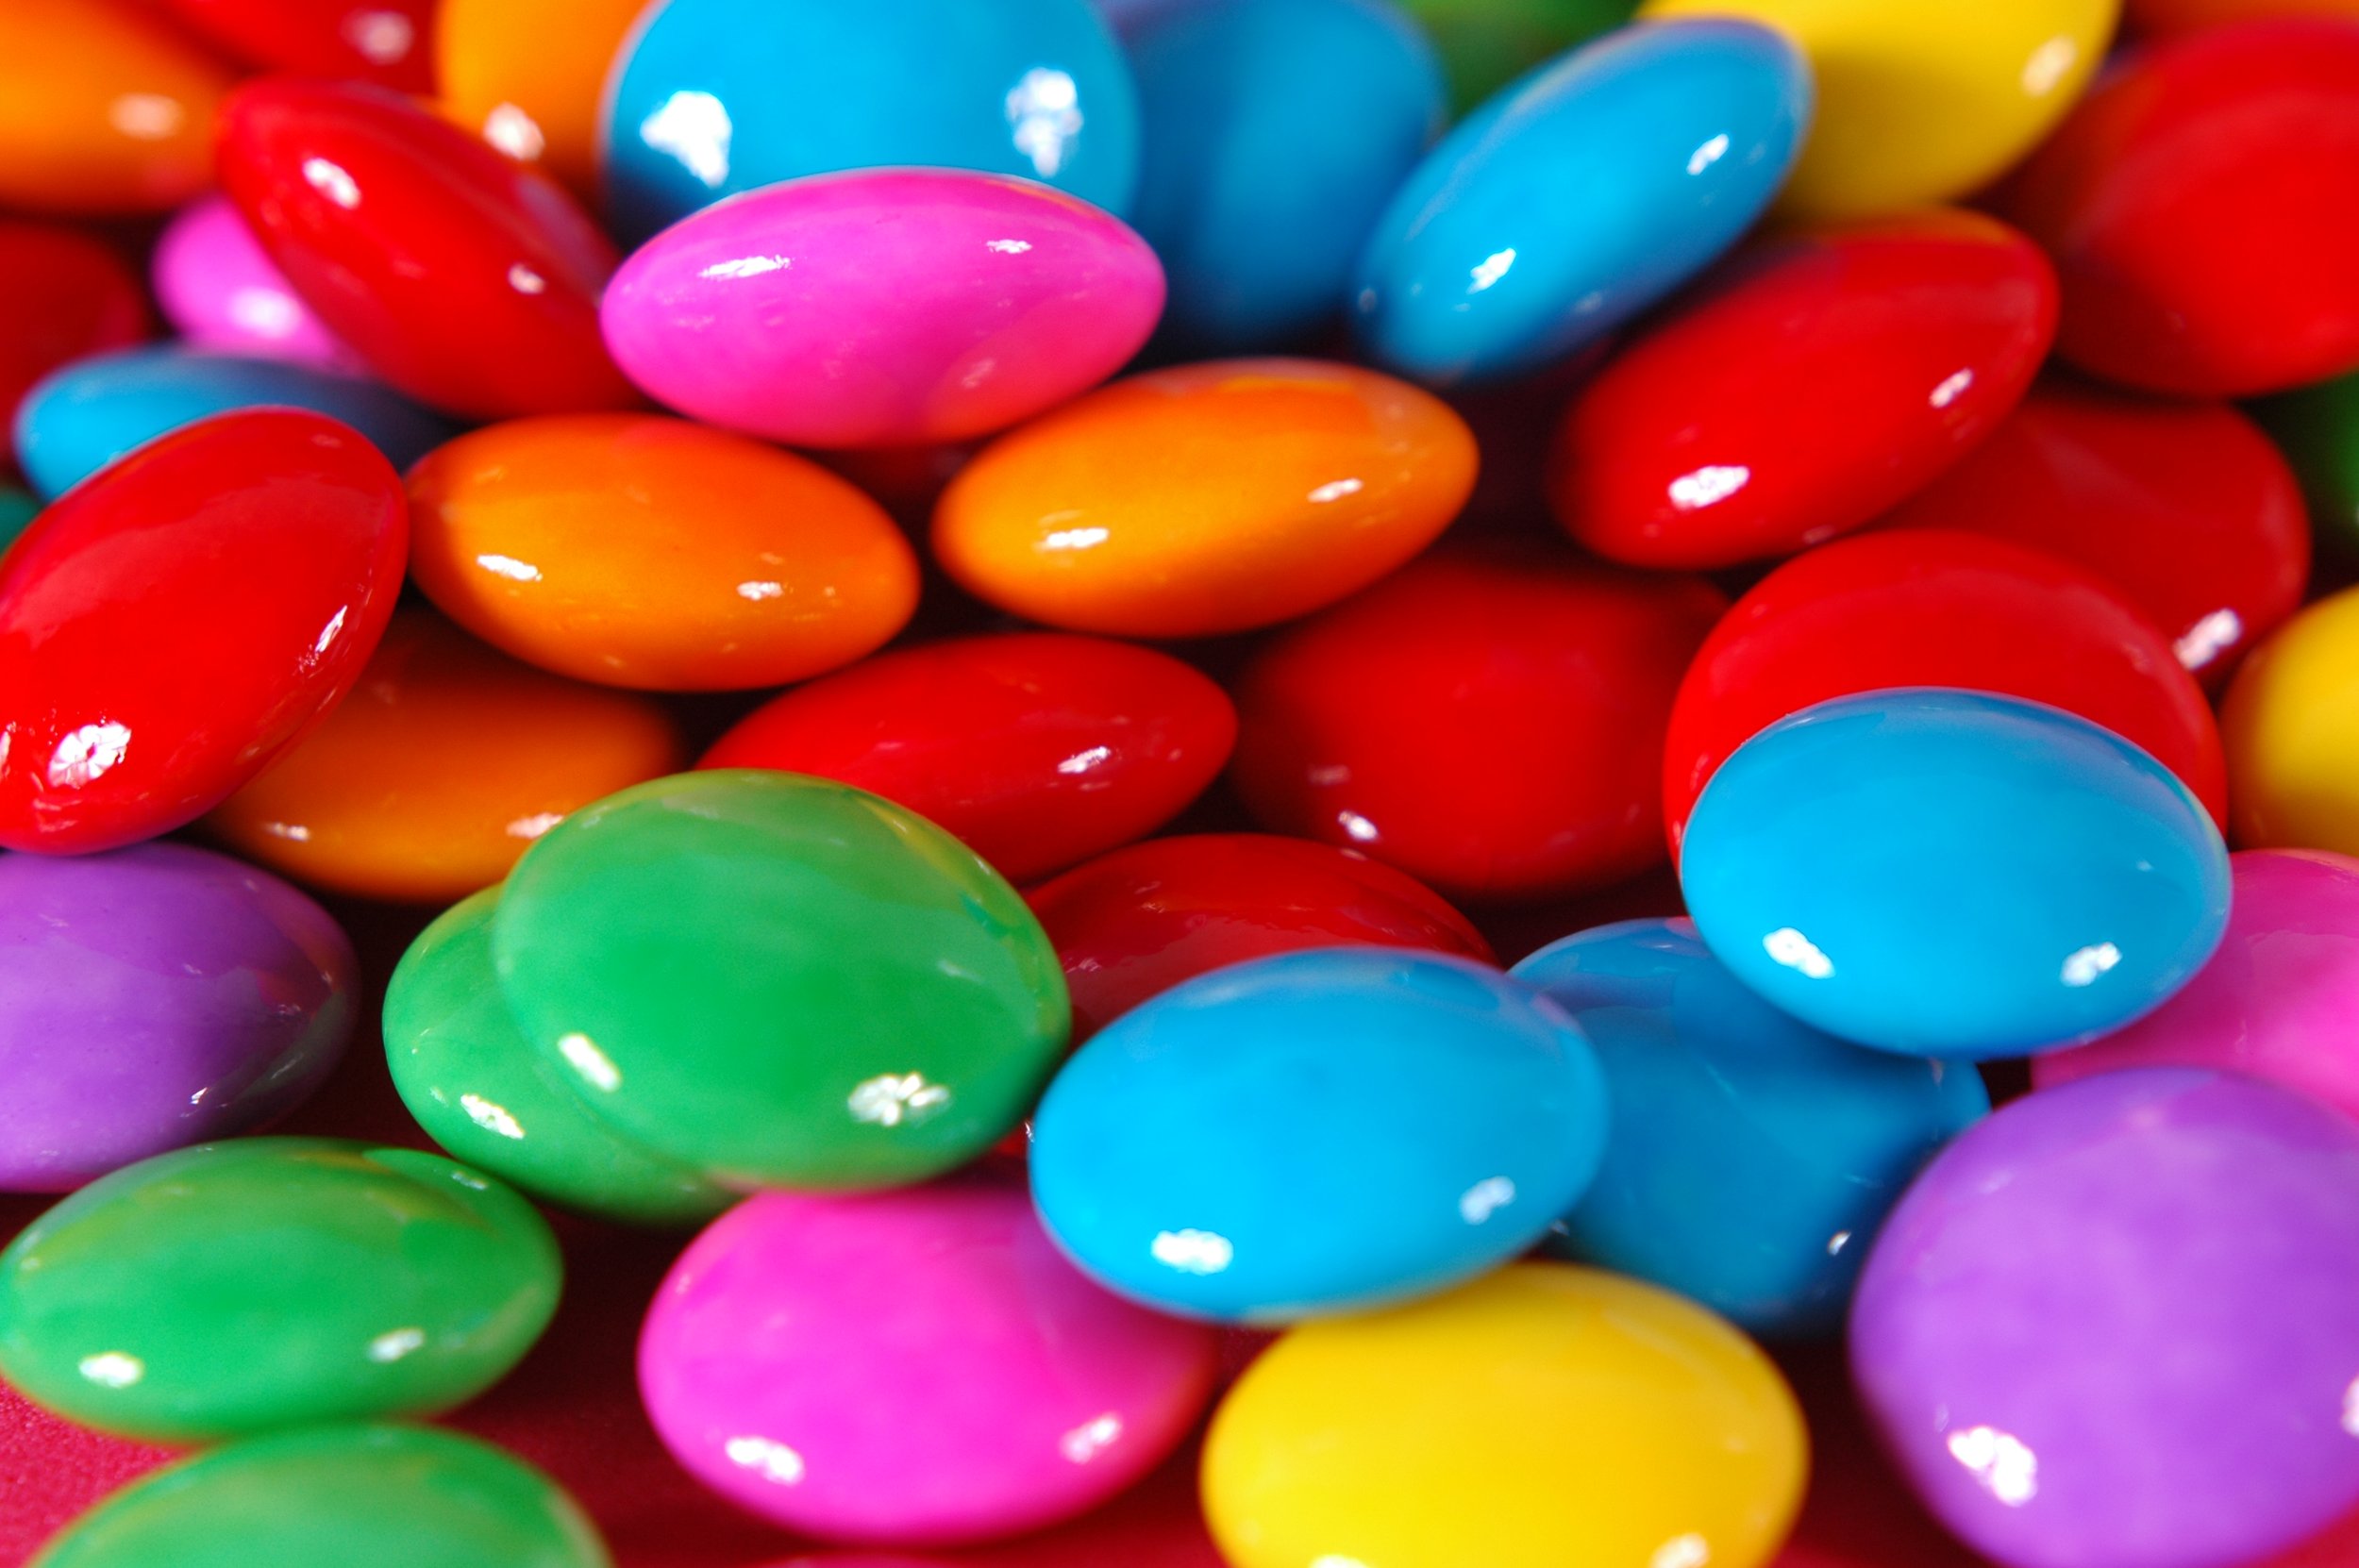 Applications Confectionery iStock-1246142730.jpg